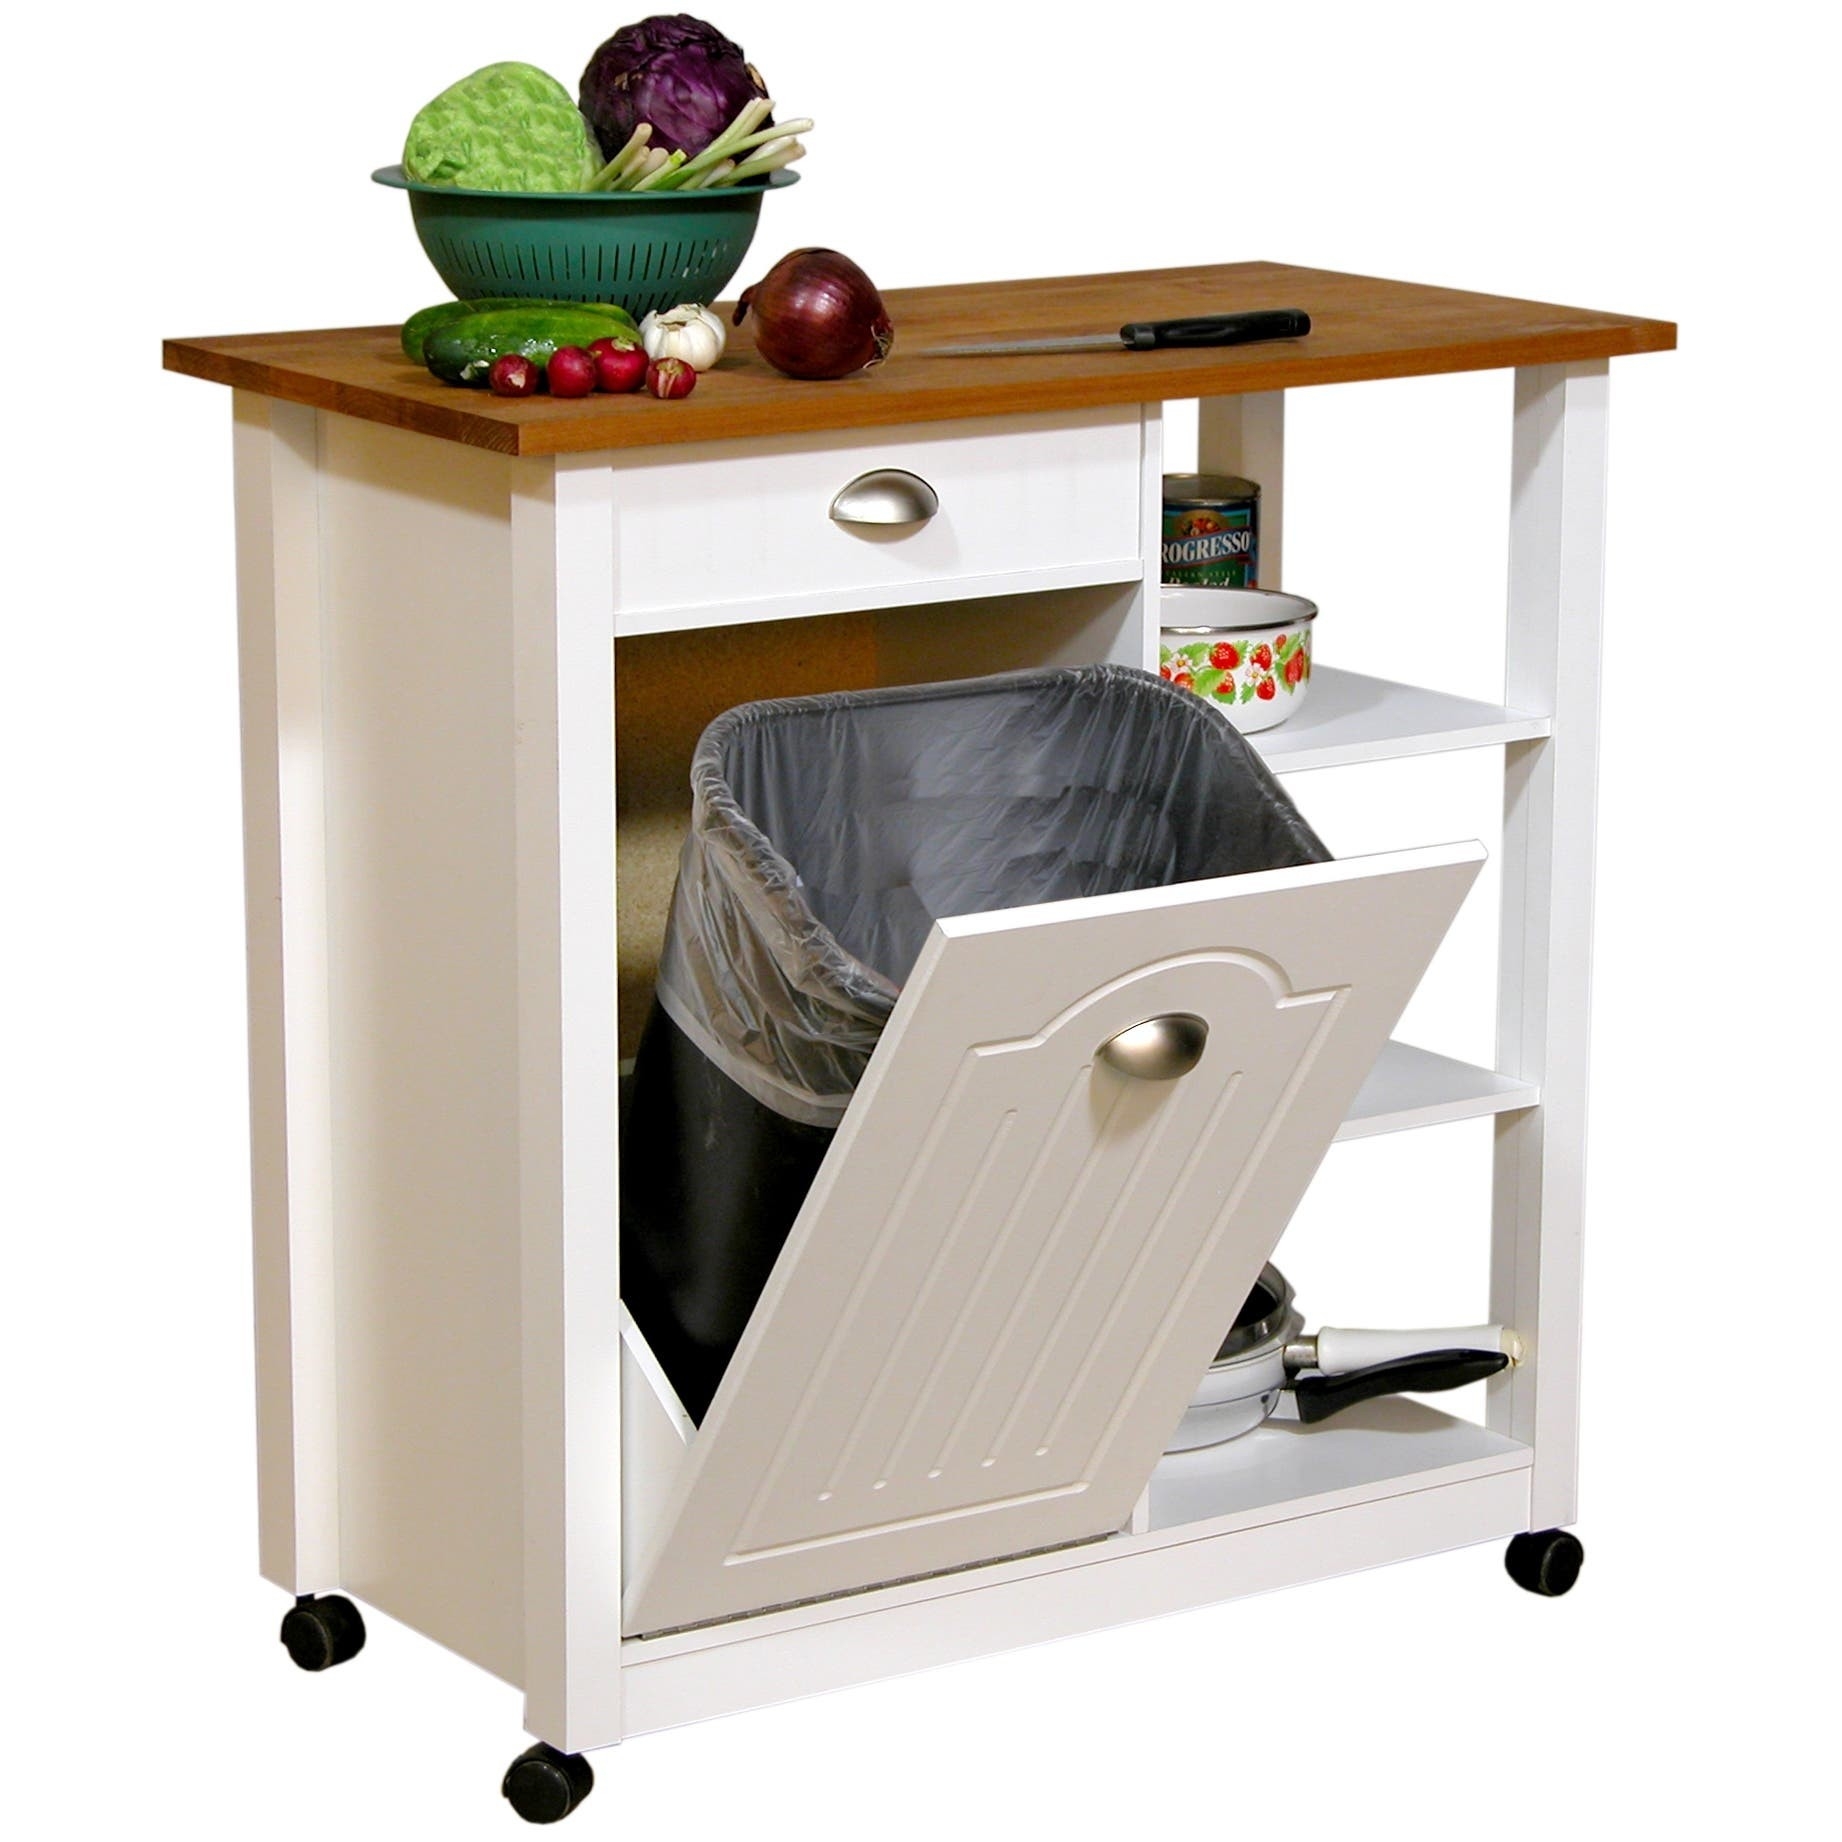 Farmhouse Industrial Kitchen Island With Handy Roll Out Trash